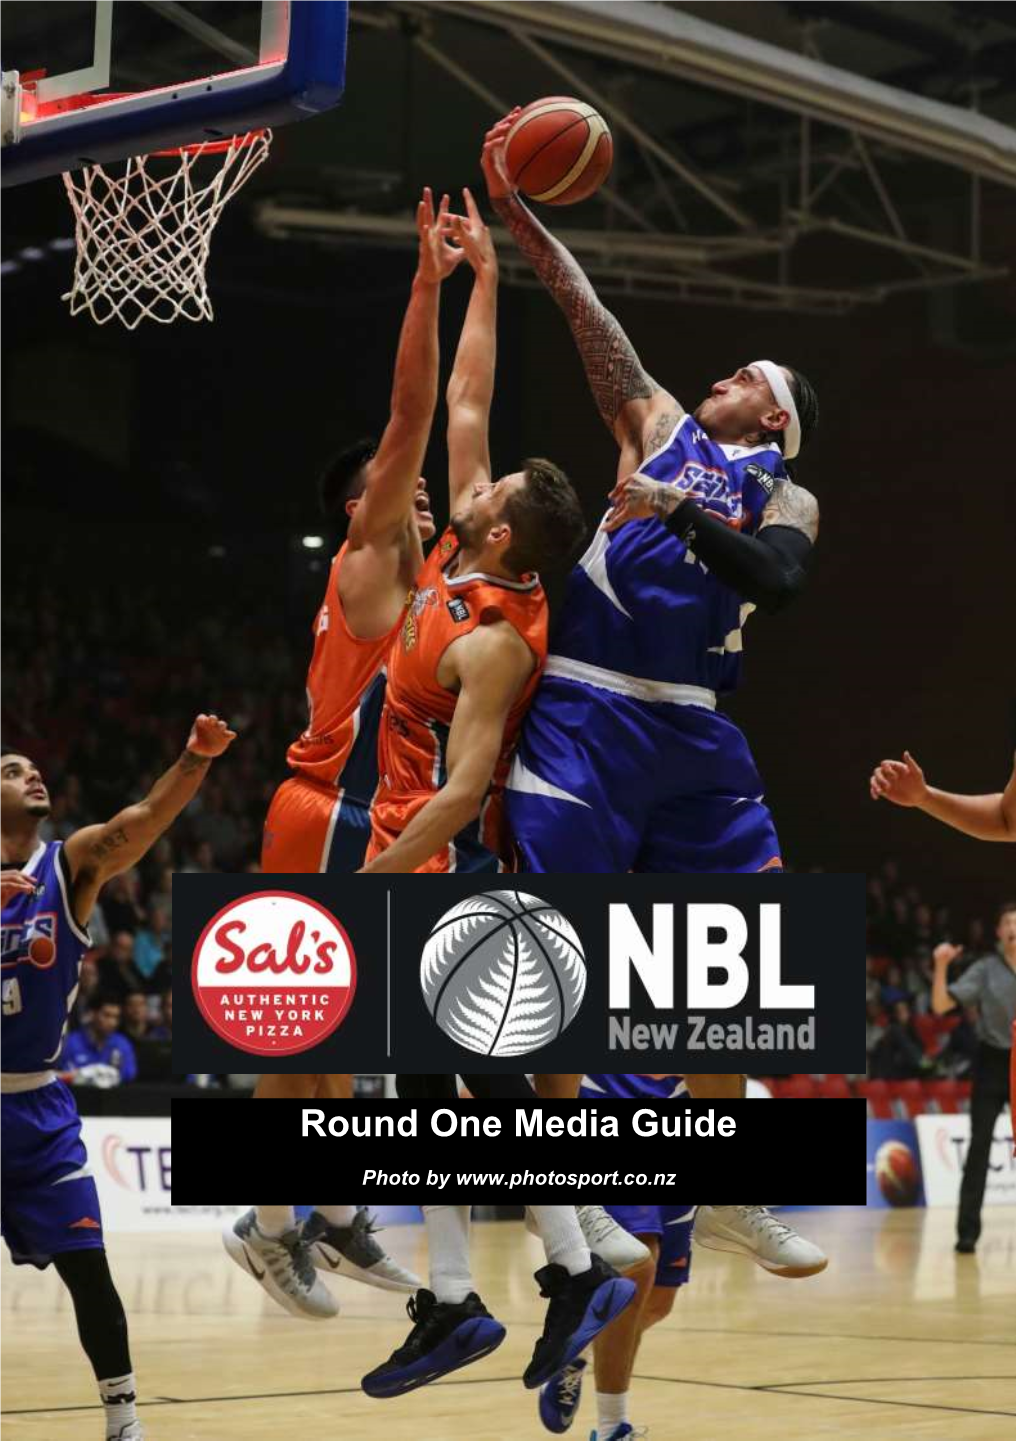 2018 Sal's NBL: Round One Media Guide